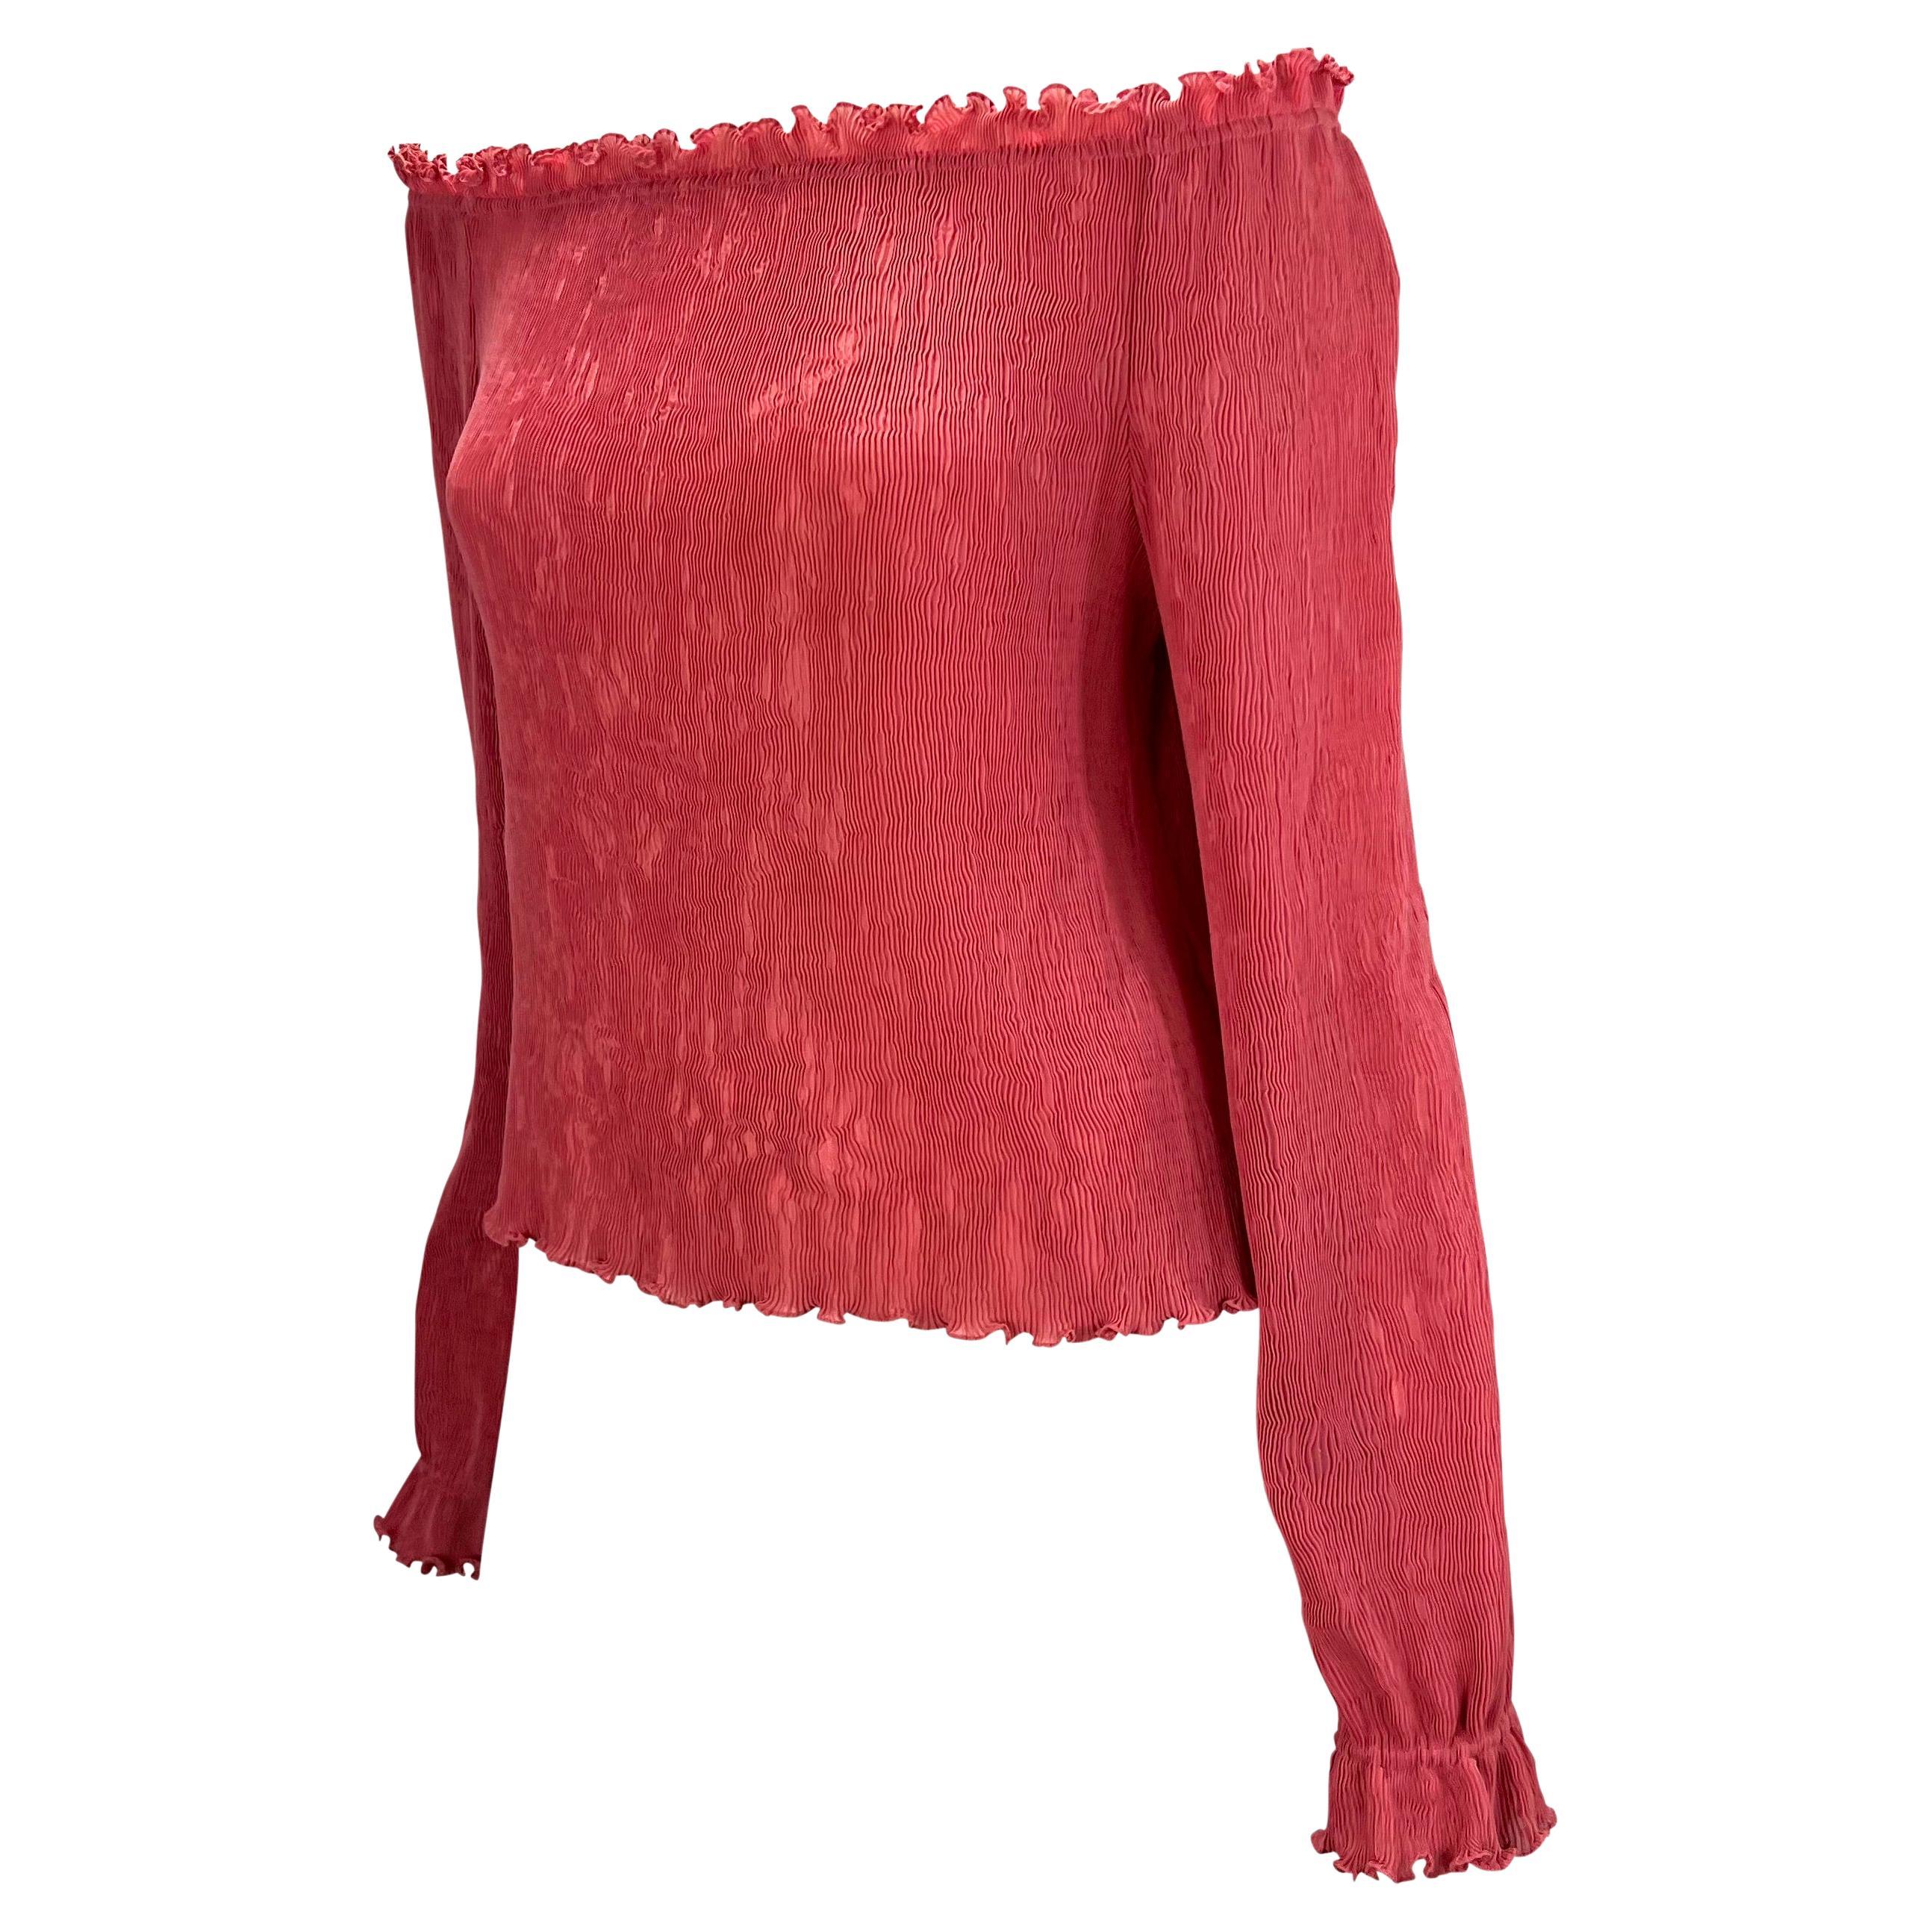 Presenting a hot pink pleated Gucci top, designed by Tom Ford. From the Spring/Summer 2000 collection, this top features a boat neck off-the-shoulder neckline with ruffle finishes at the neckline, cuffs, and hem. This must-have top is the perfect